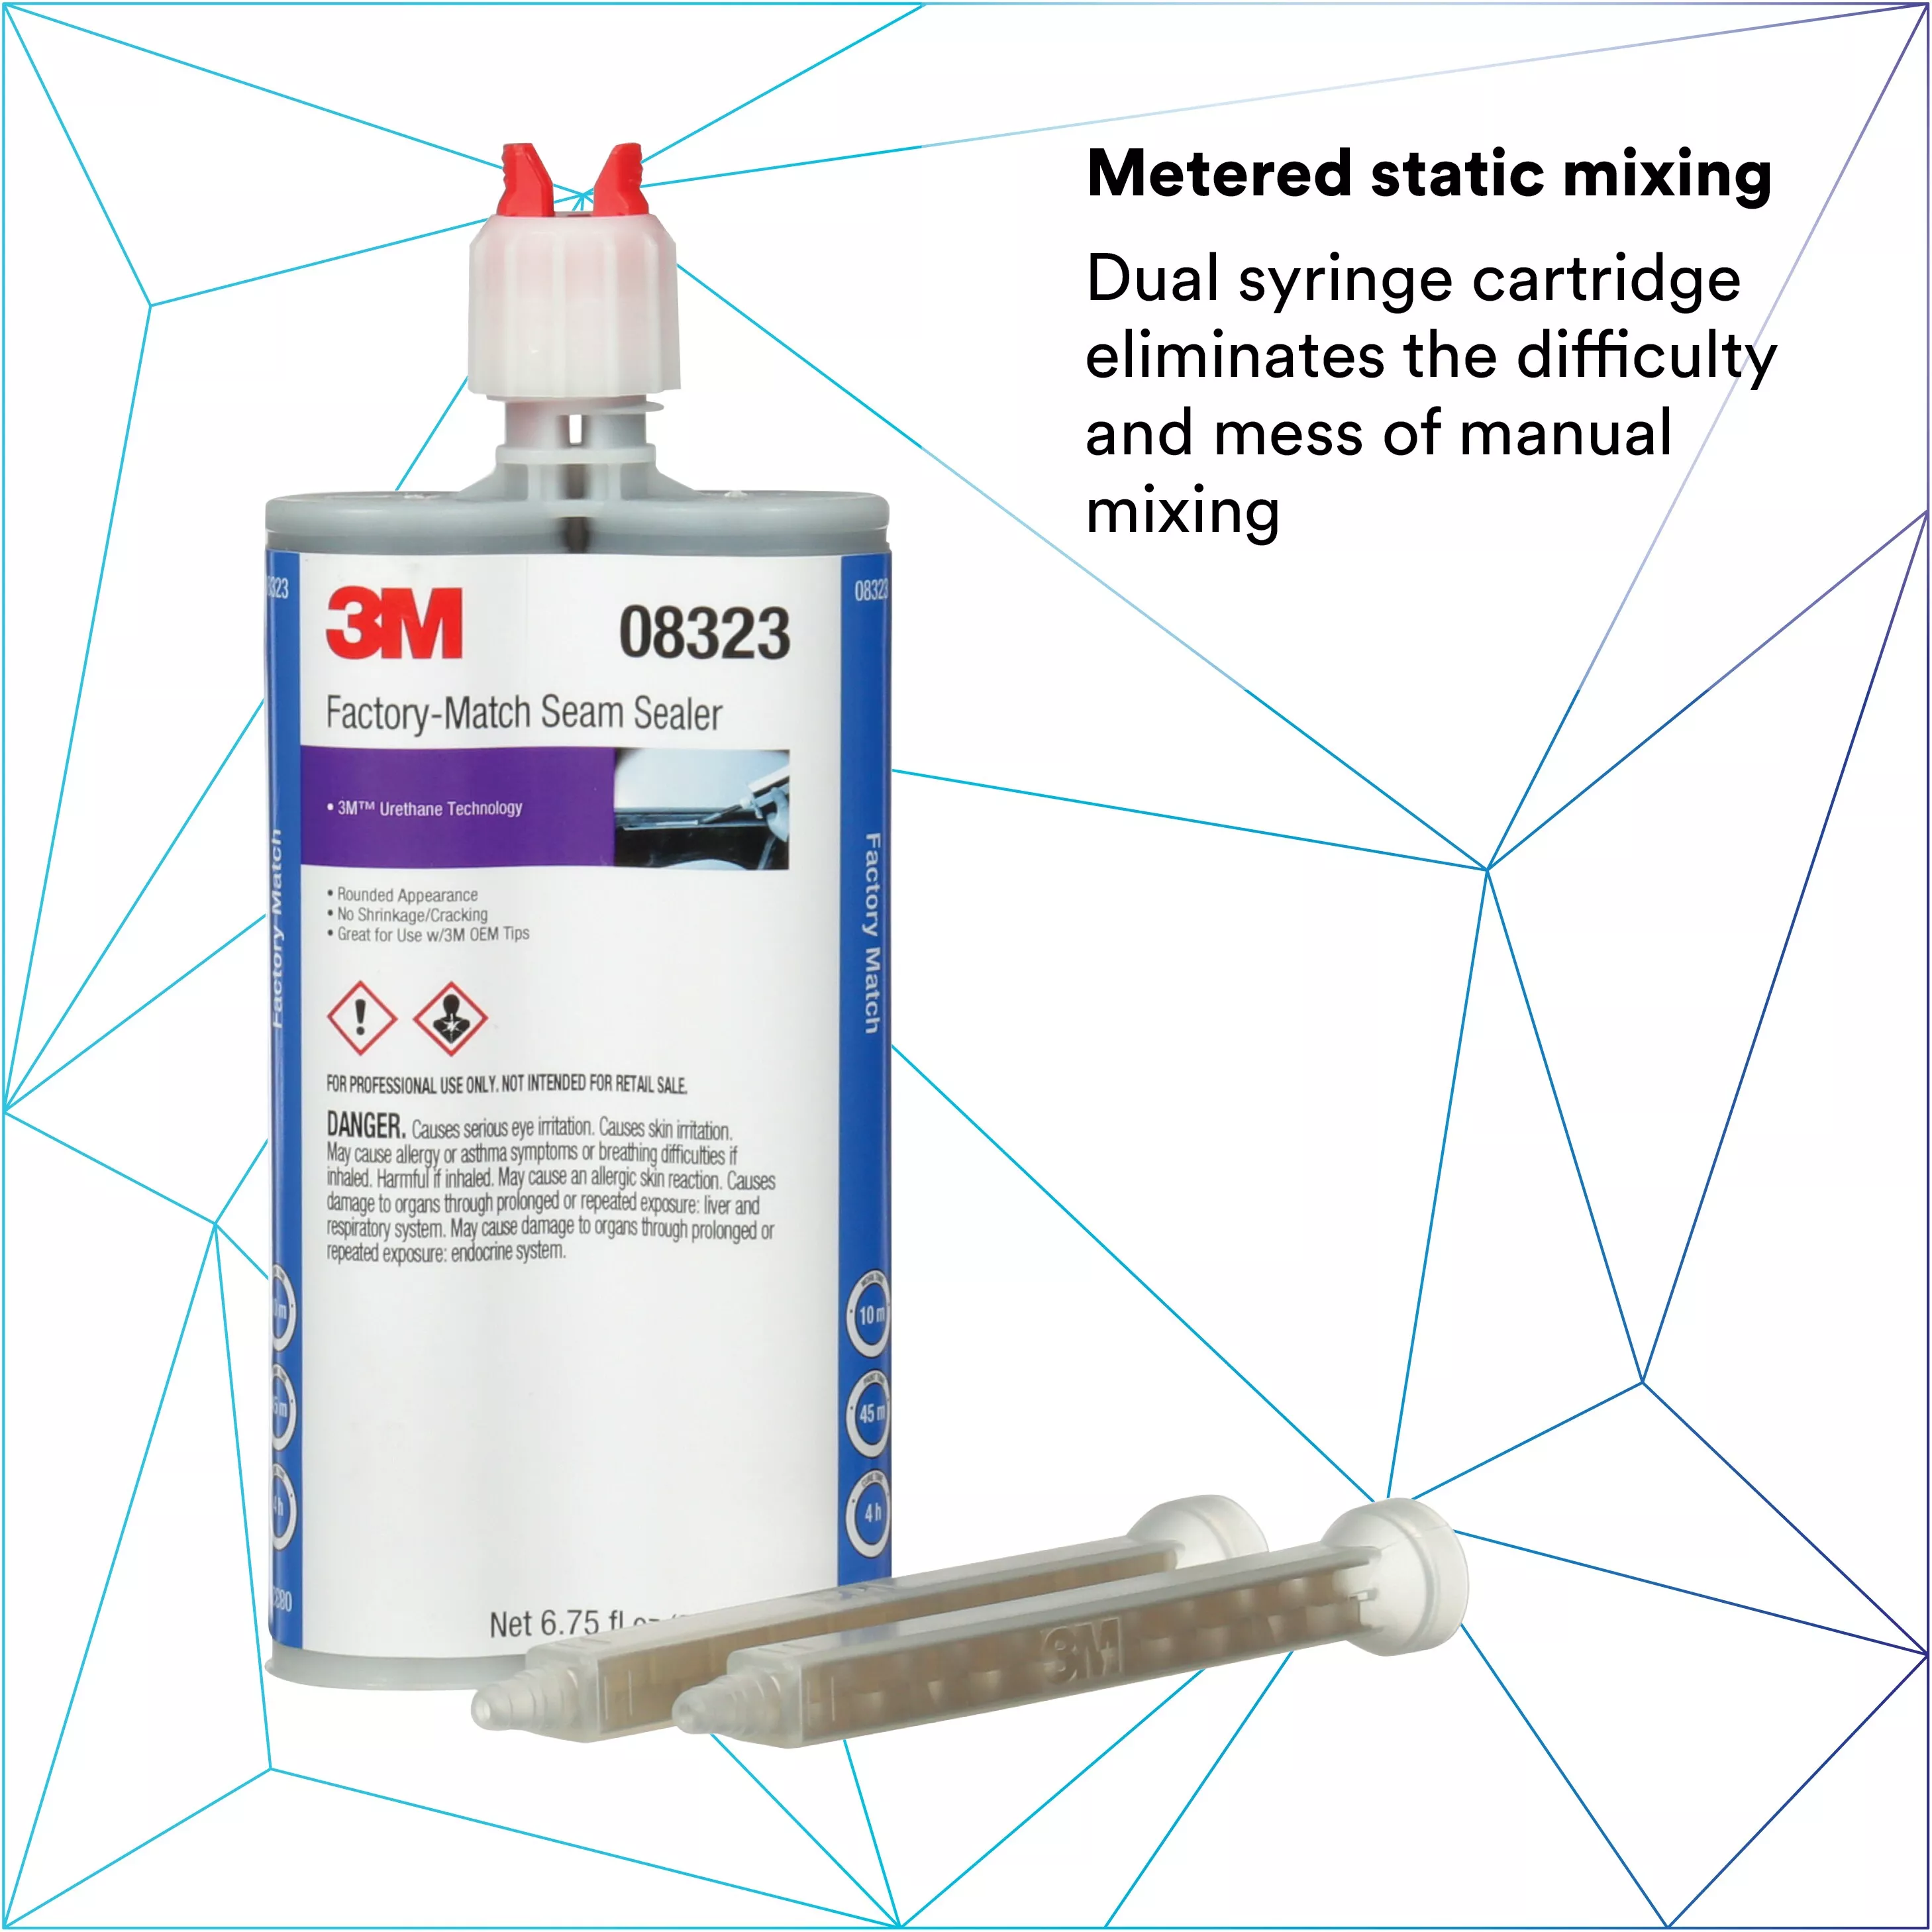 Product Number 08323 | 3M™ Factory-Match Seam Sealer